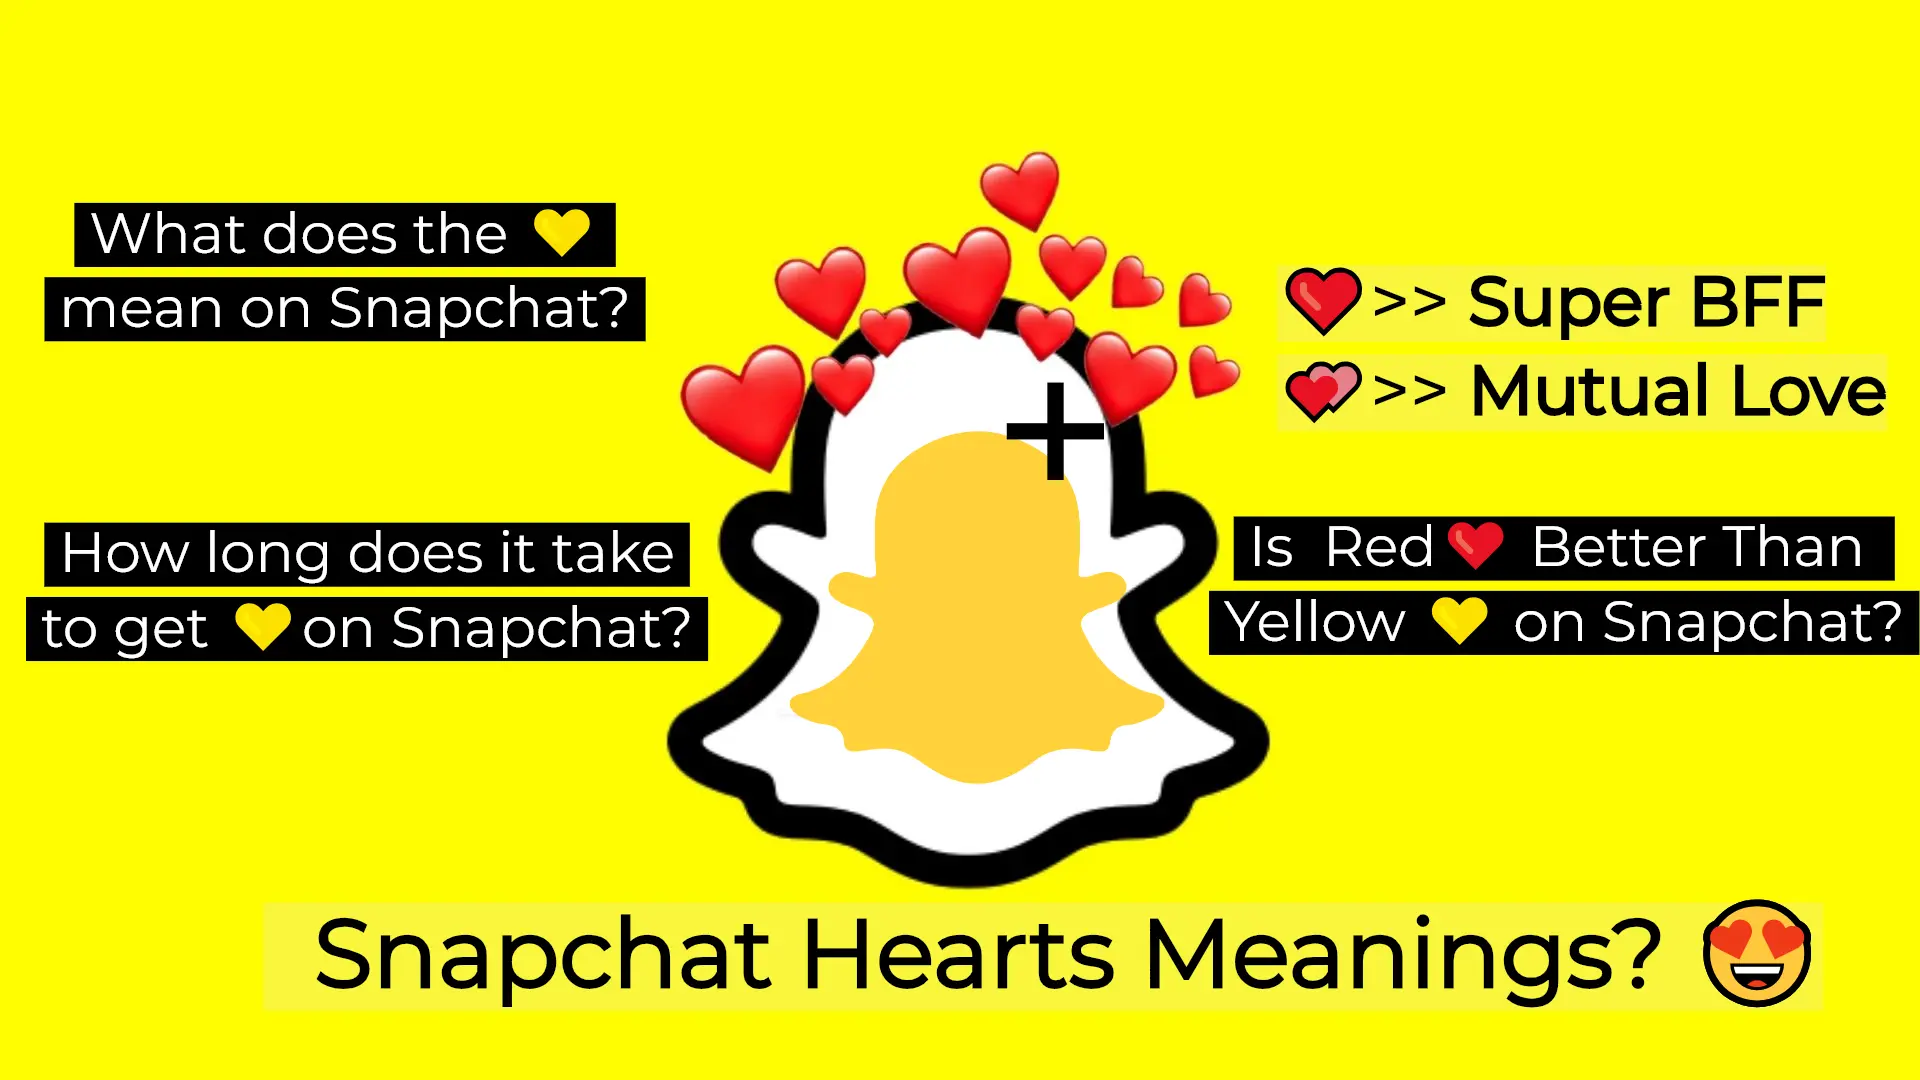 Snapchat Hearts Meanings